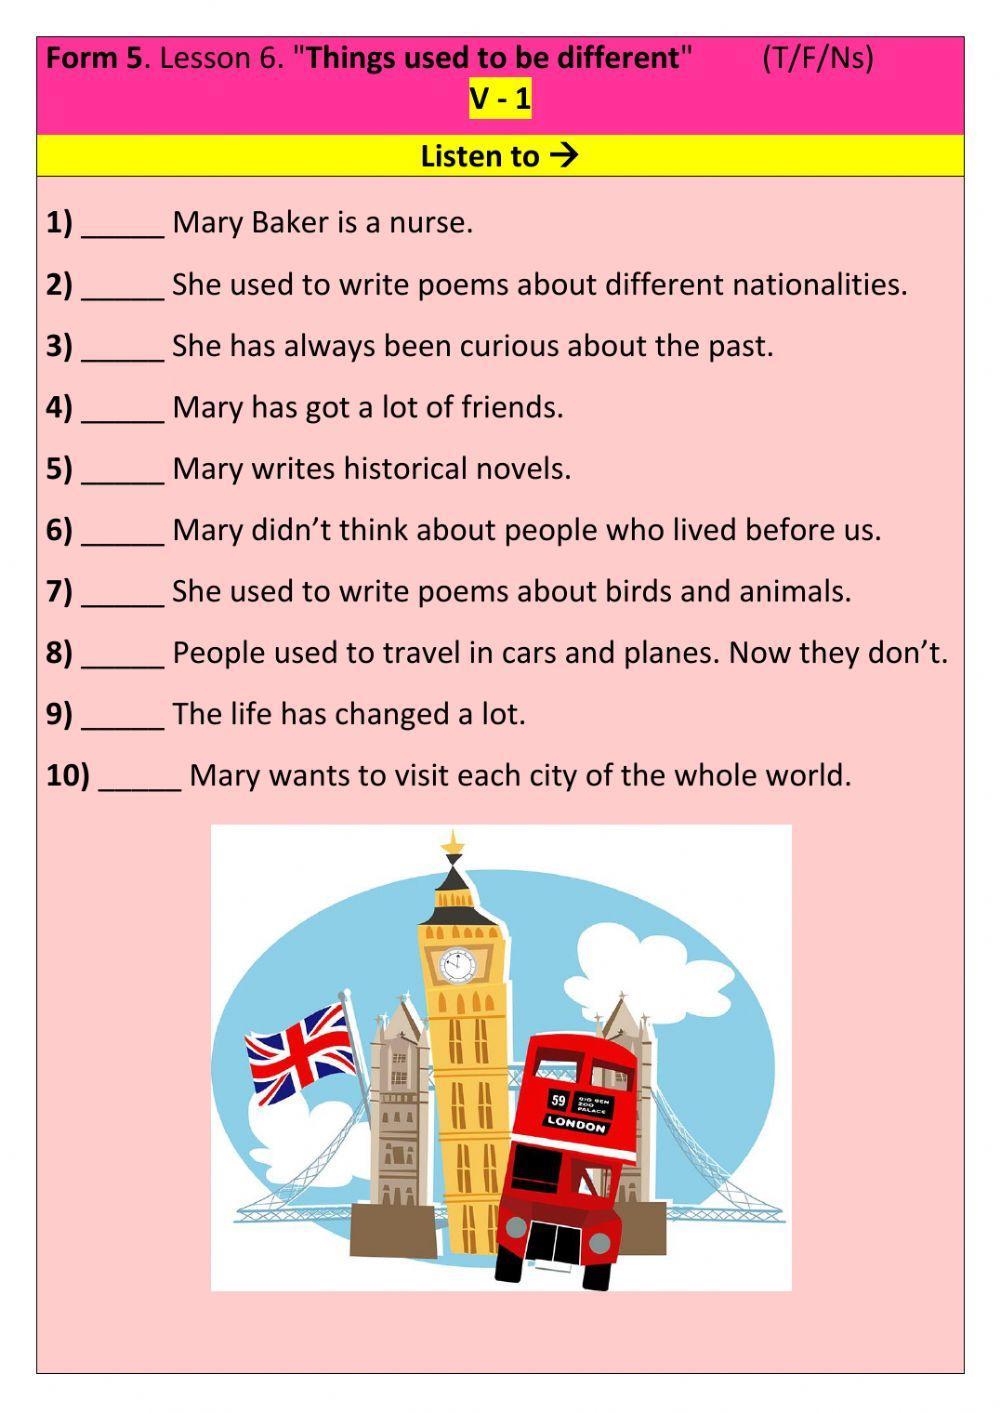 Form 5. Lesson 6. Listening -Things Used to be different Many Years Ago-. V-1